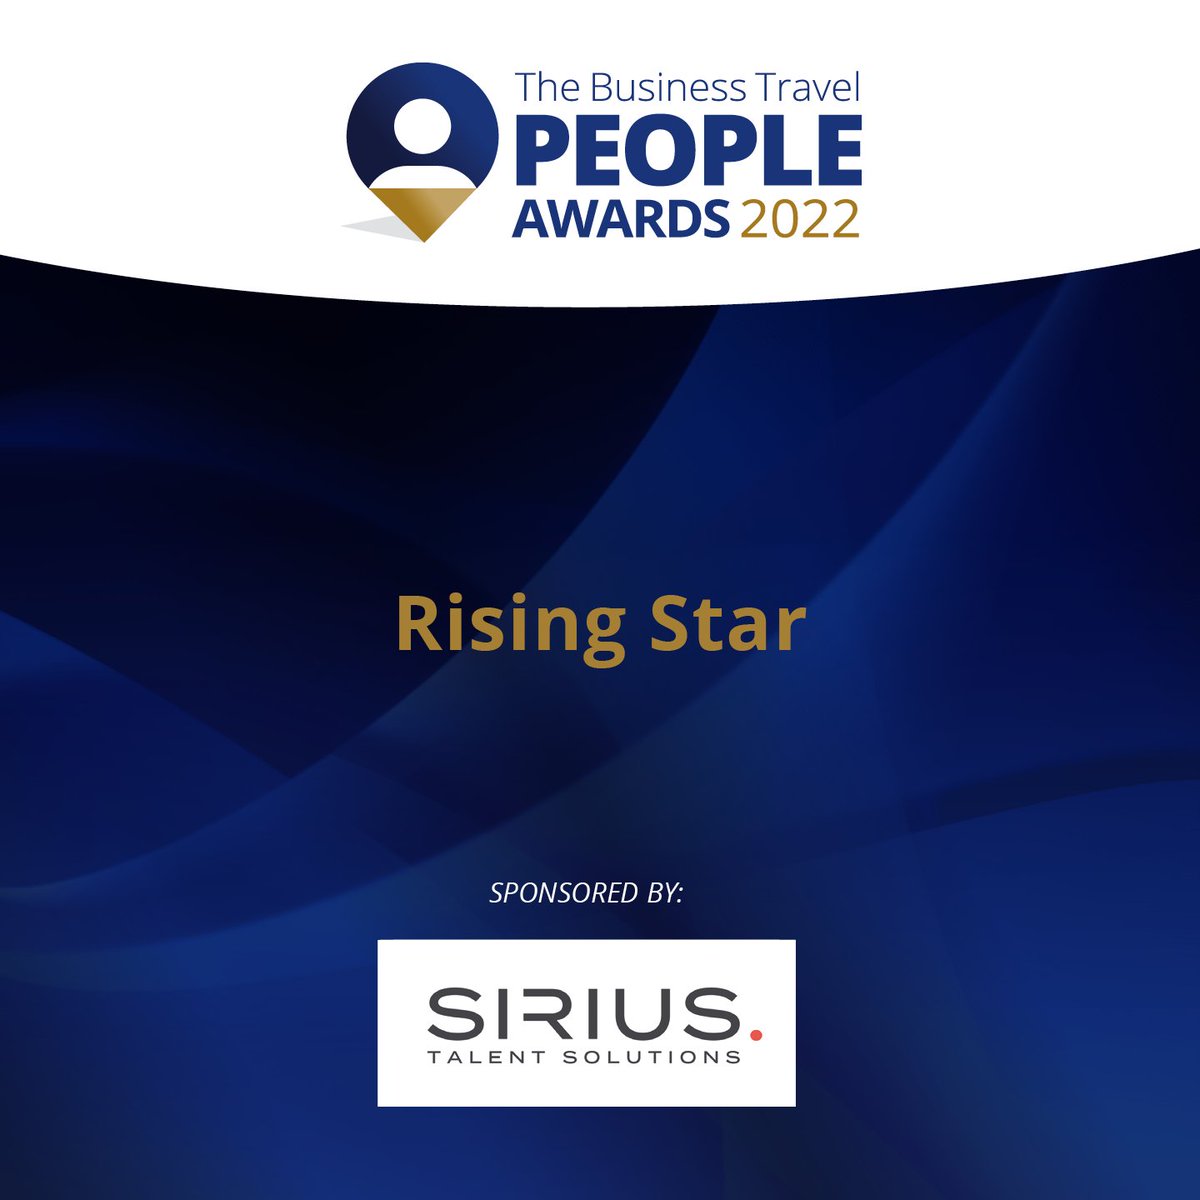 Our Rising Star award is kindly sponsored by Sirius Talent Solutions for the second year running. Thank you! #TBTPA2022